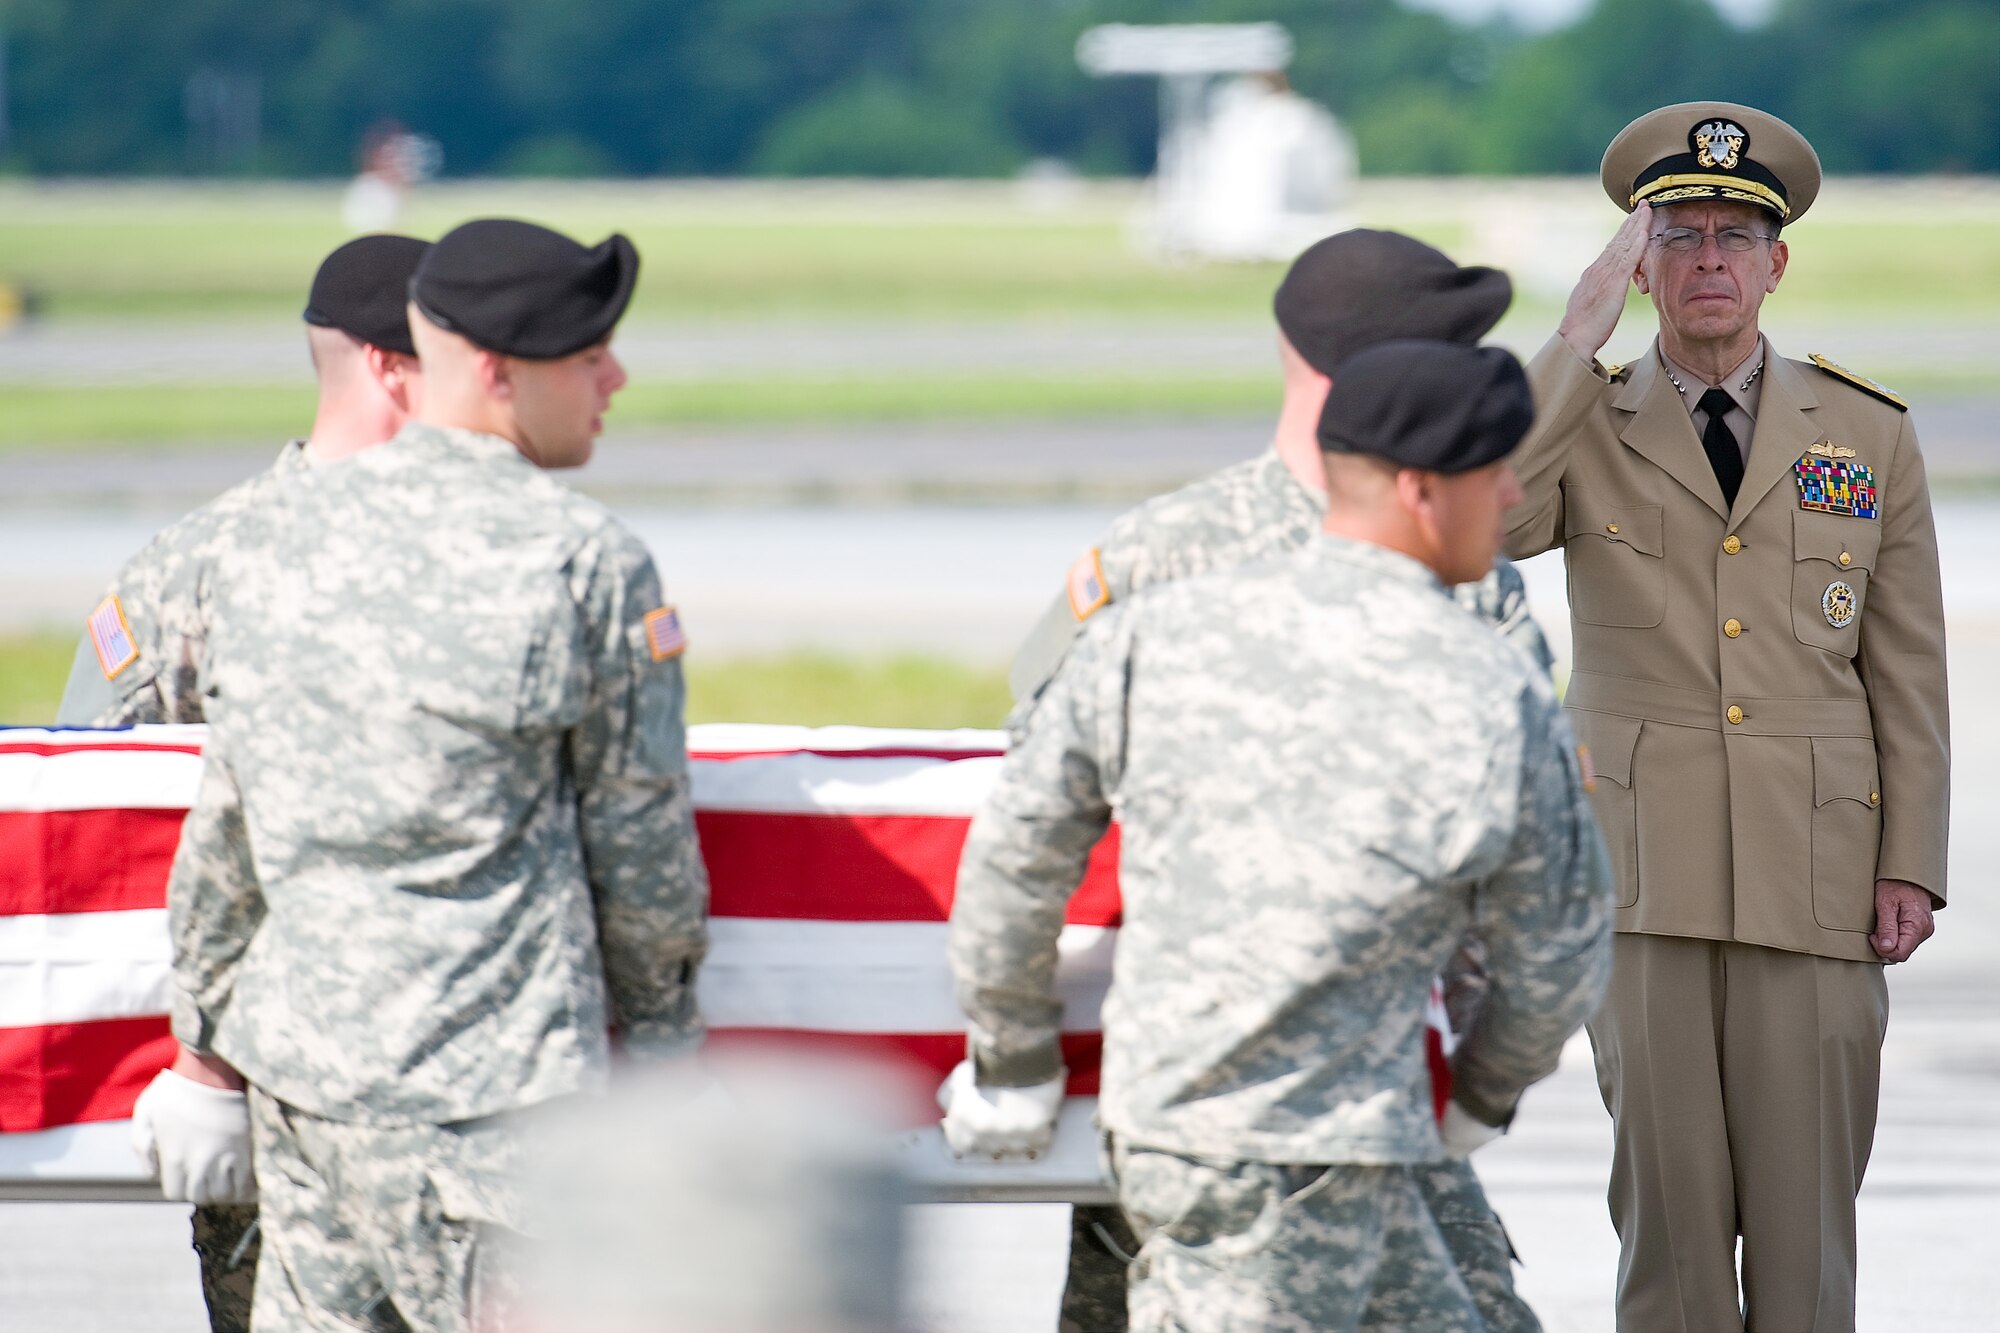 Navy Adm. Mike Mullen, chairman of the Joint Chiefs of Staff, renders honors as a U.S. Army carry team transfers the remains of Sgt. Brock H. Chavers at Dover AFB July 8. Sergeant Brock is assigned to Company D, 2nd Battalion, 121st Infantry, Americas, Ga., Georgia Army National Guard. (U.S. Air Force photo/Roland Balik)